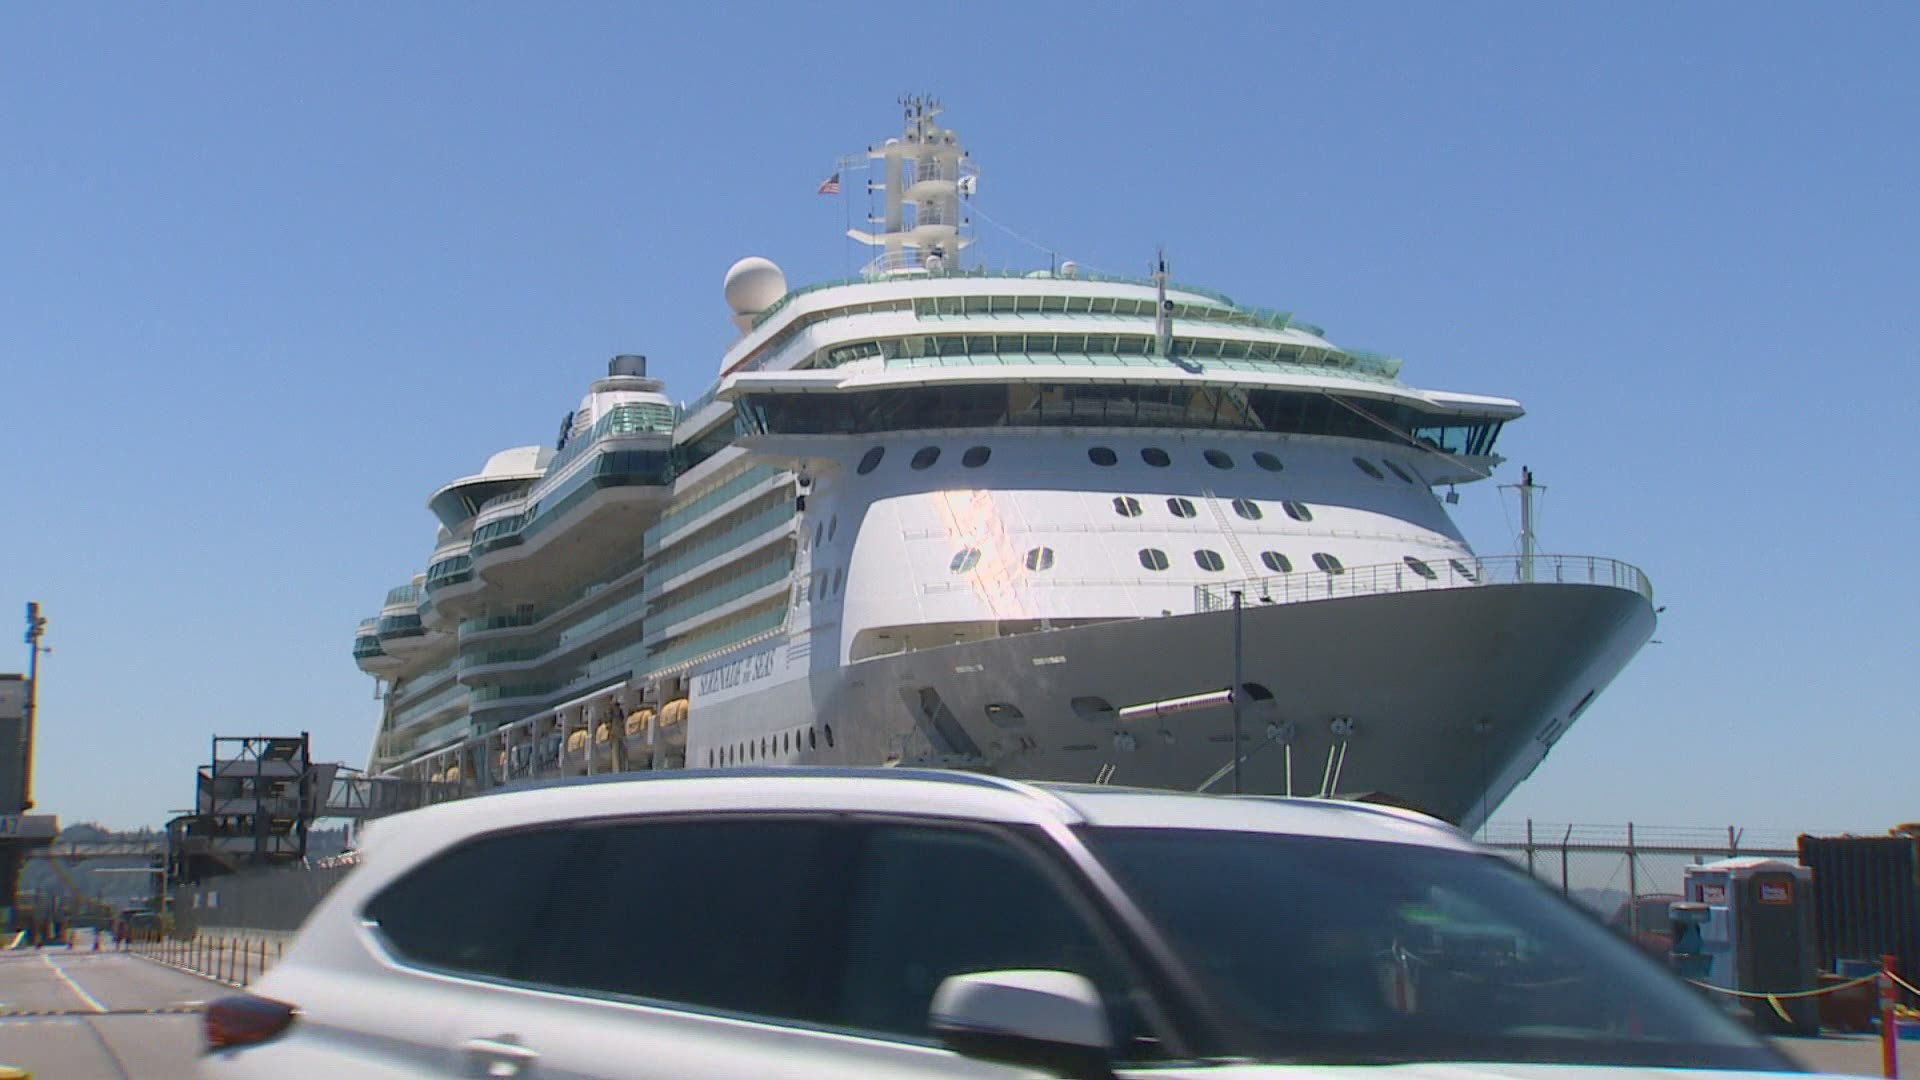 The sailing of the Serenade of the Seas from the Port of Seattle to Alaska marks the first cruise since COVID-19 wiped out the entire 2020 season.